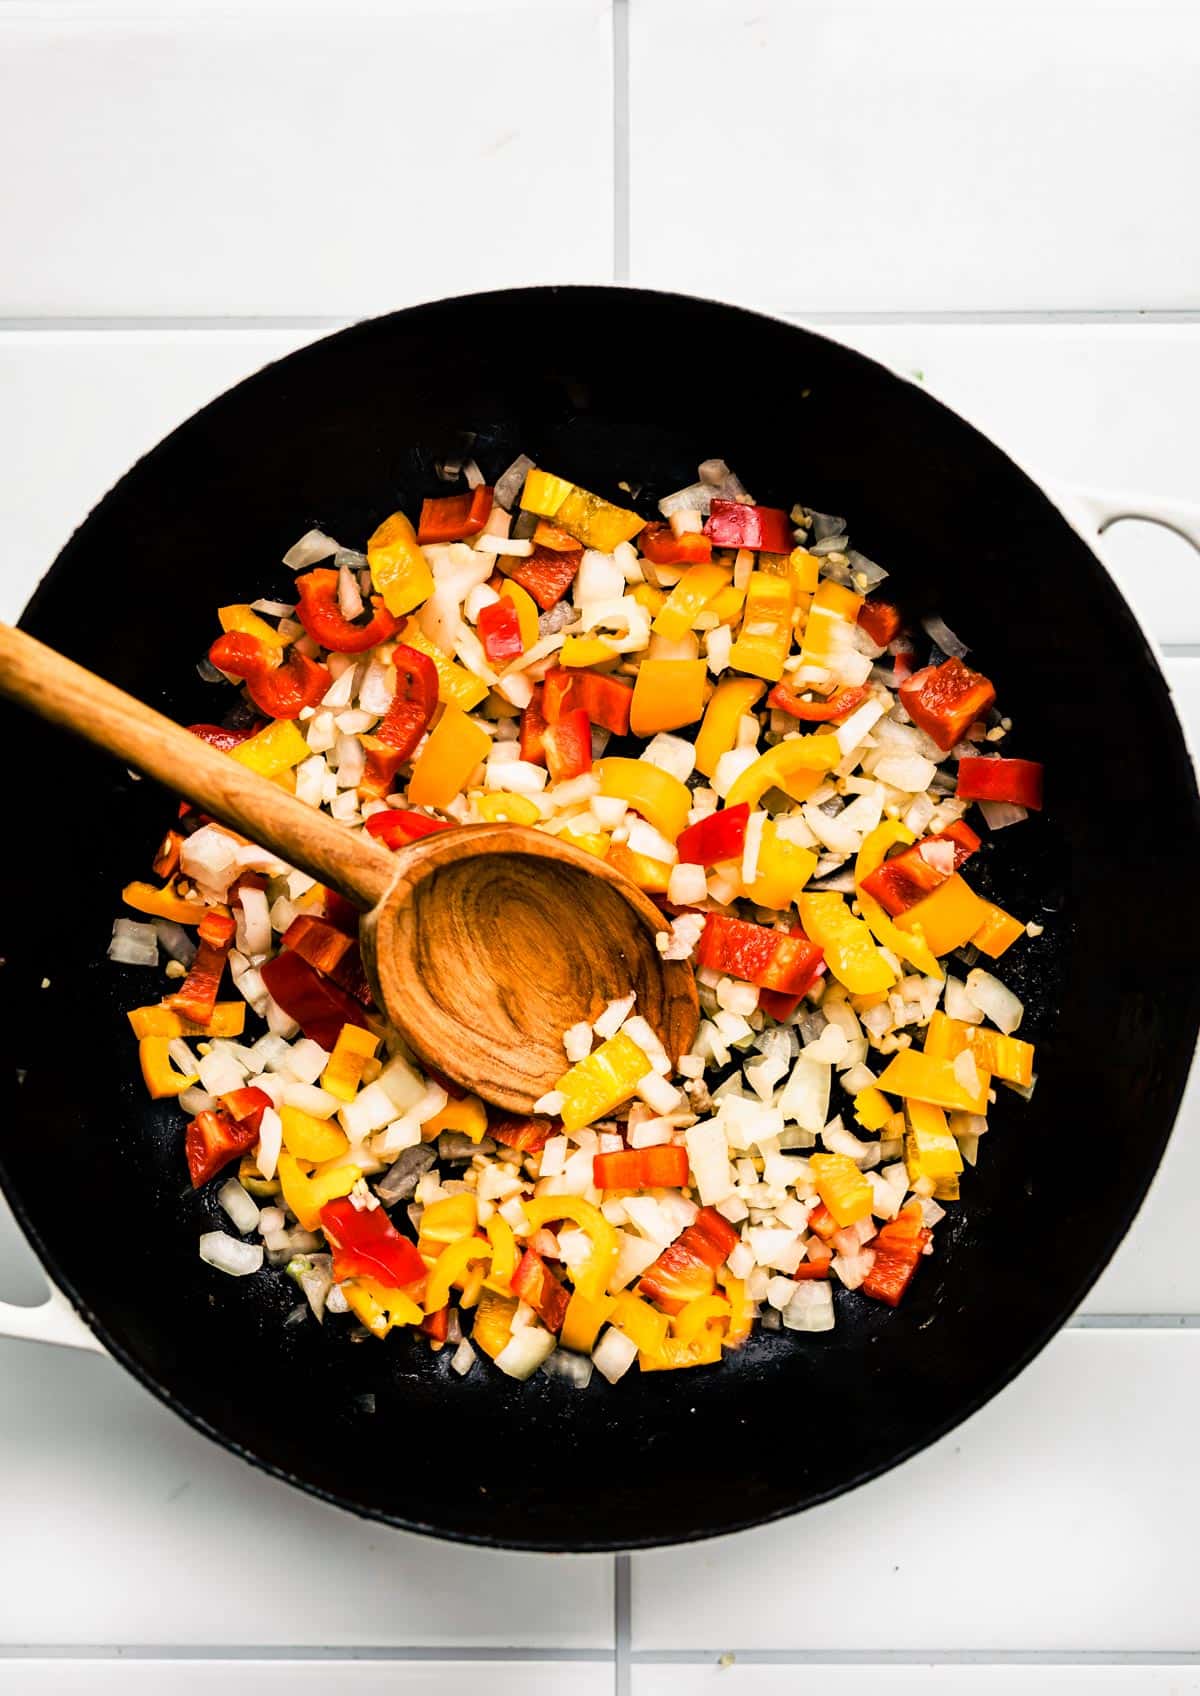 black skillet with onion and pepper. Spoon in middle. overhead shot